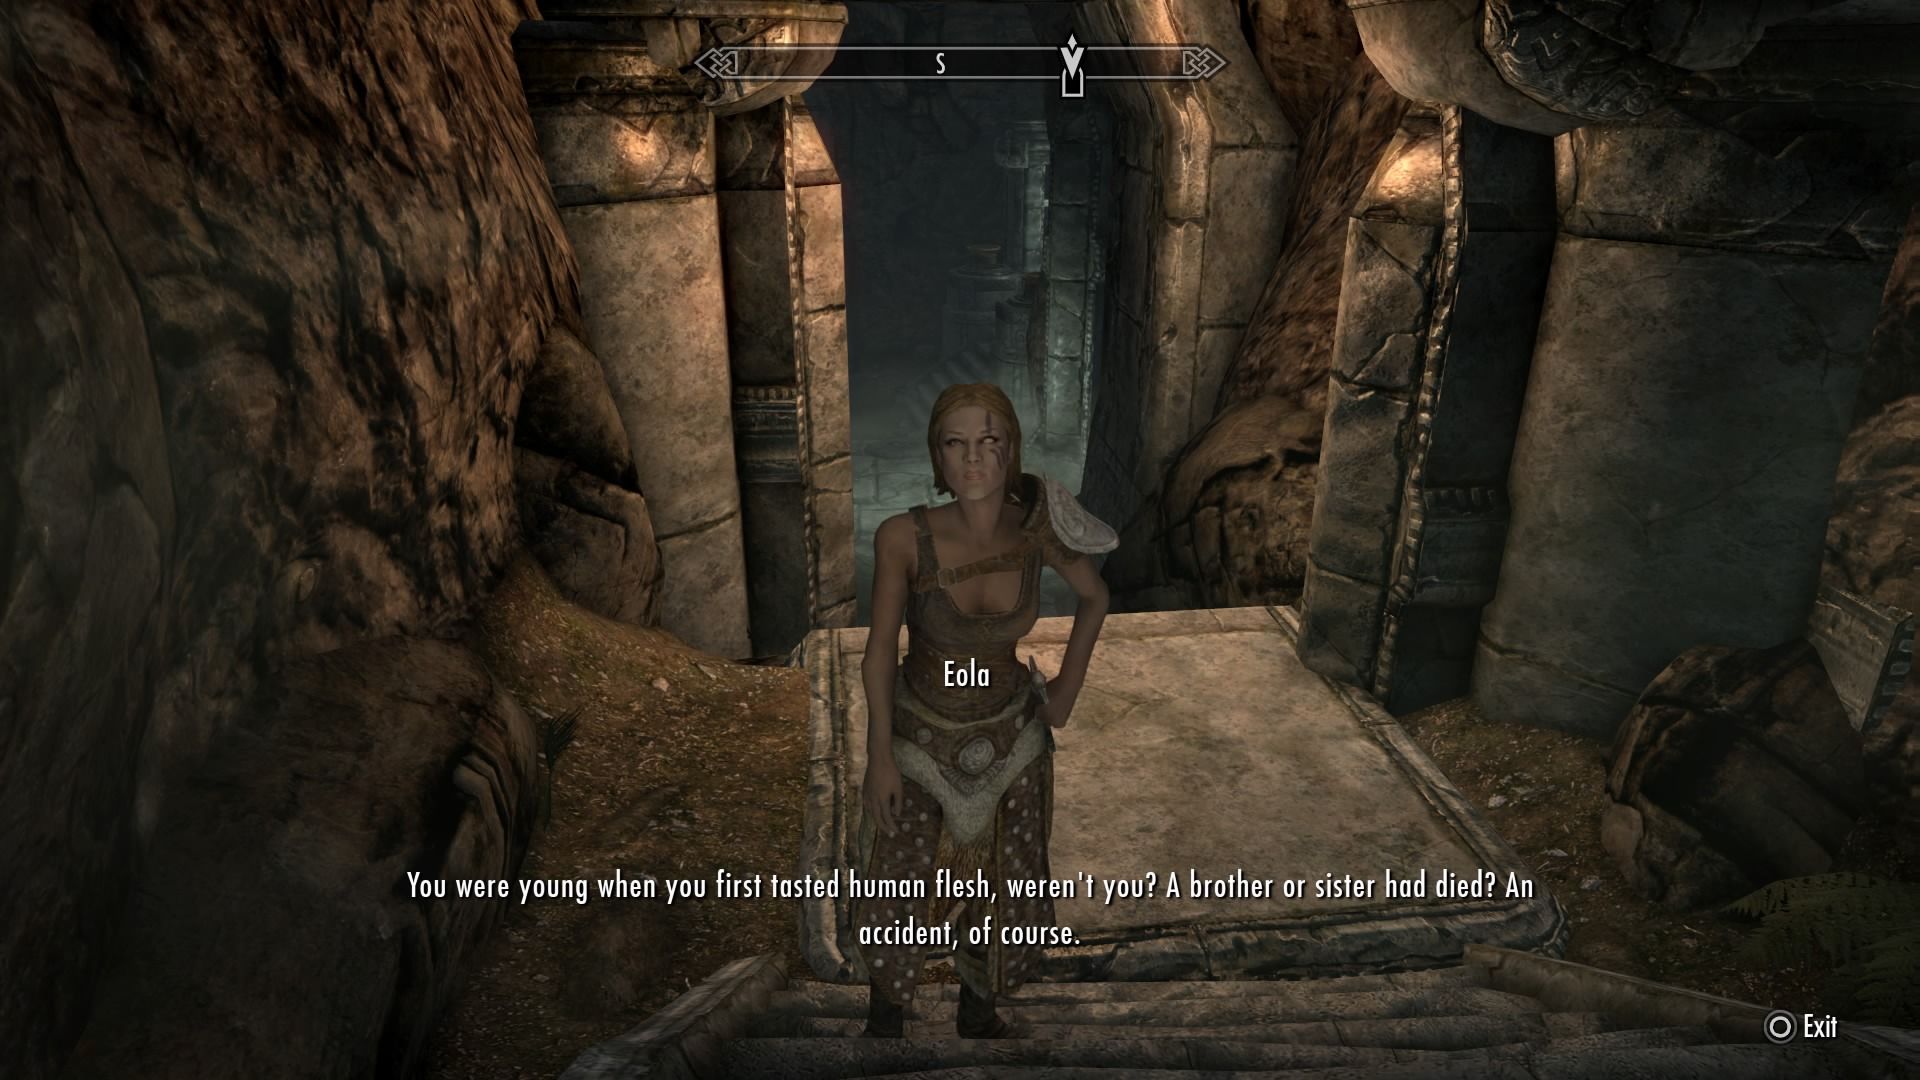 skyrim voices quiet when looking at them